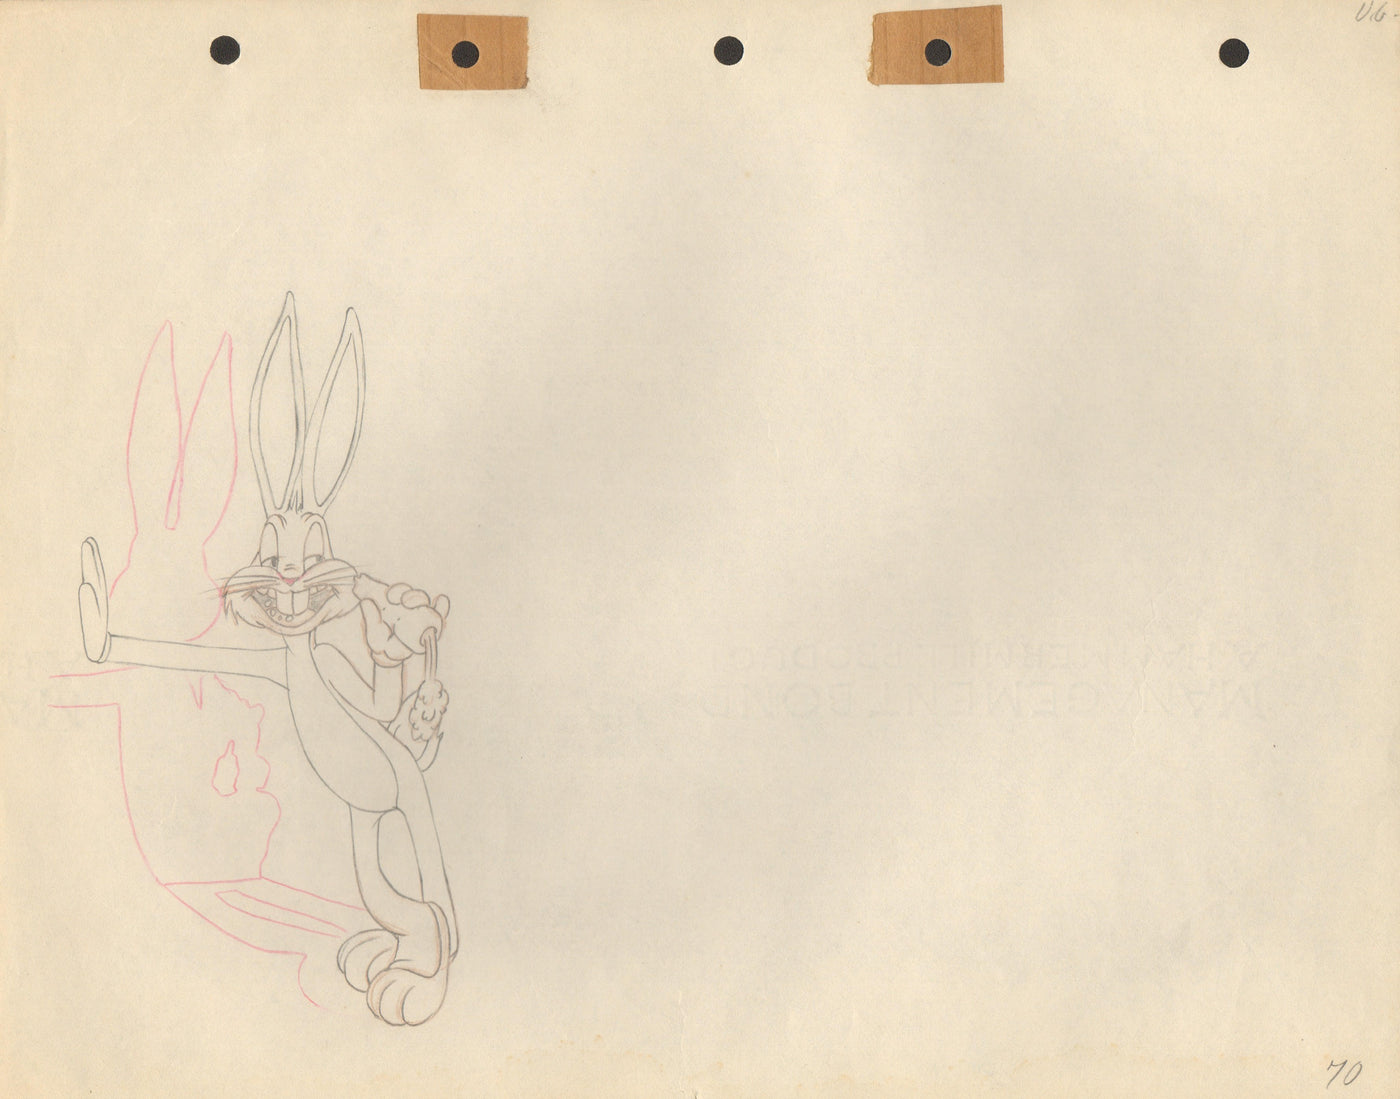 Original Warner Brothers Production Drawing Featuring Bugs Bunny